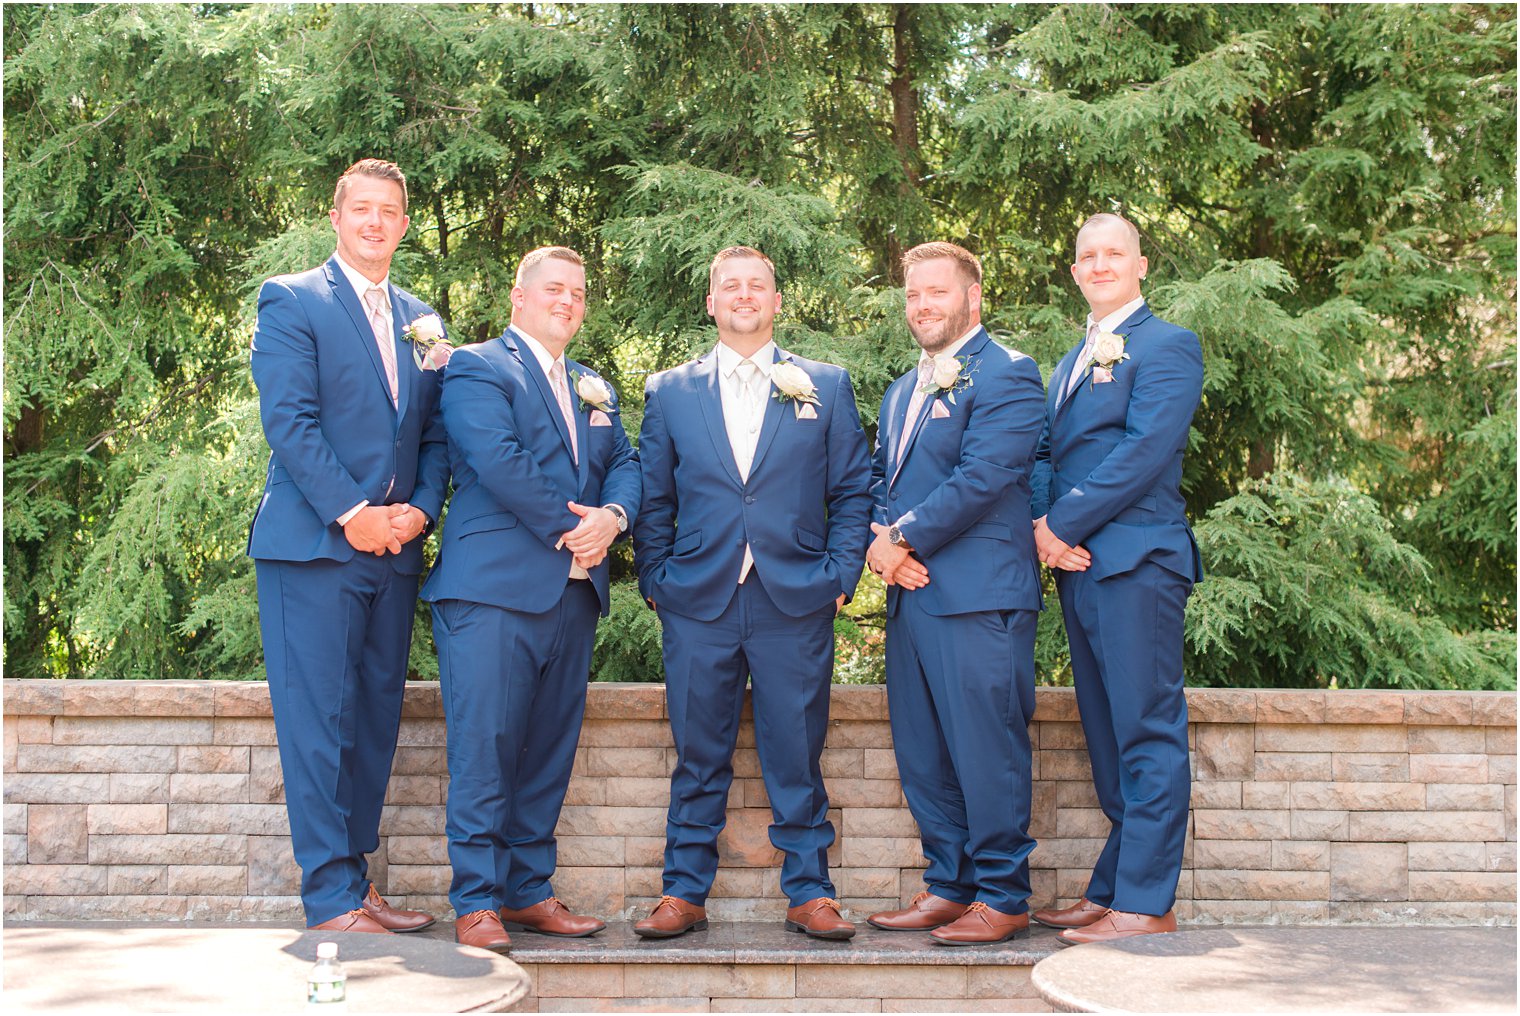 groom and groomsmen in navy suits pose by brick wall in New Jersey 